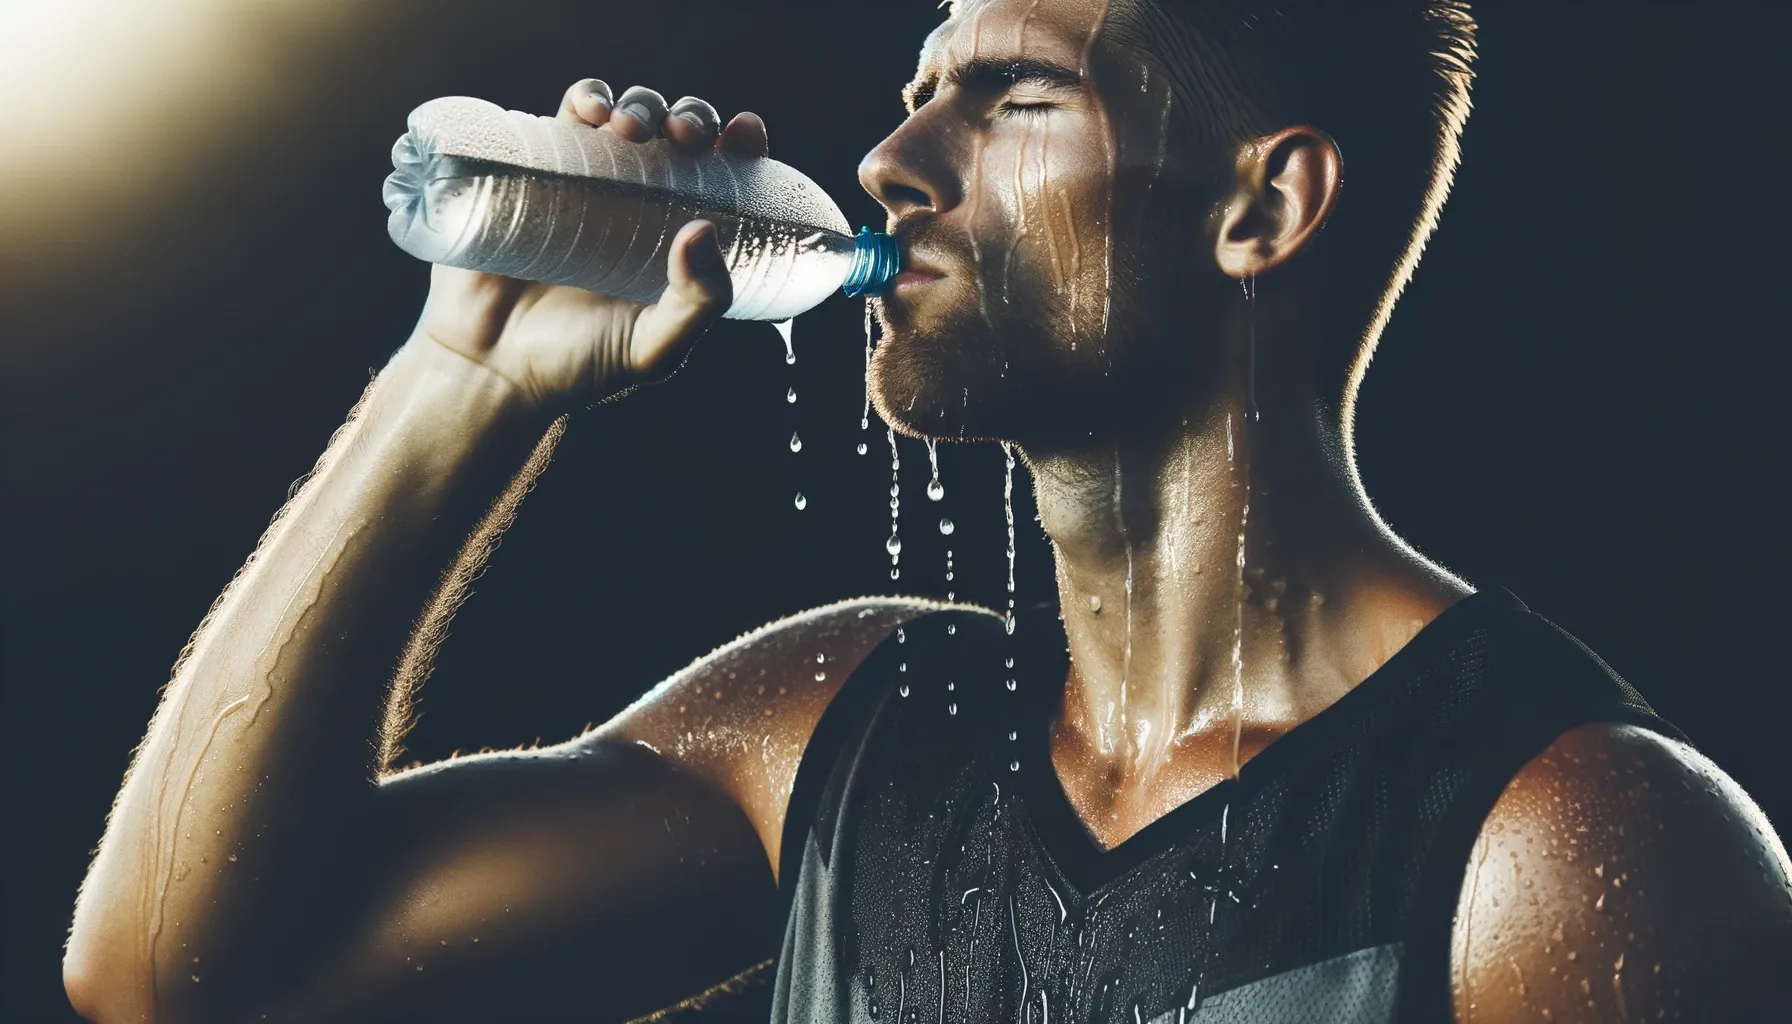 Athlete drinking water post-workout.